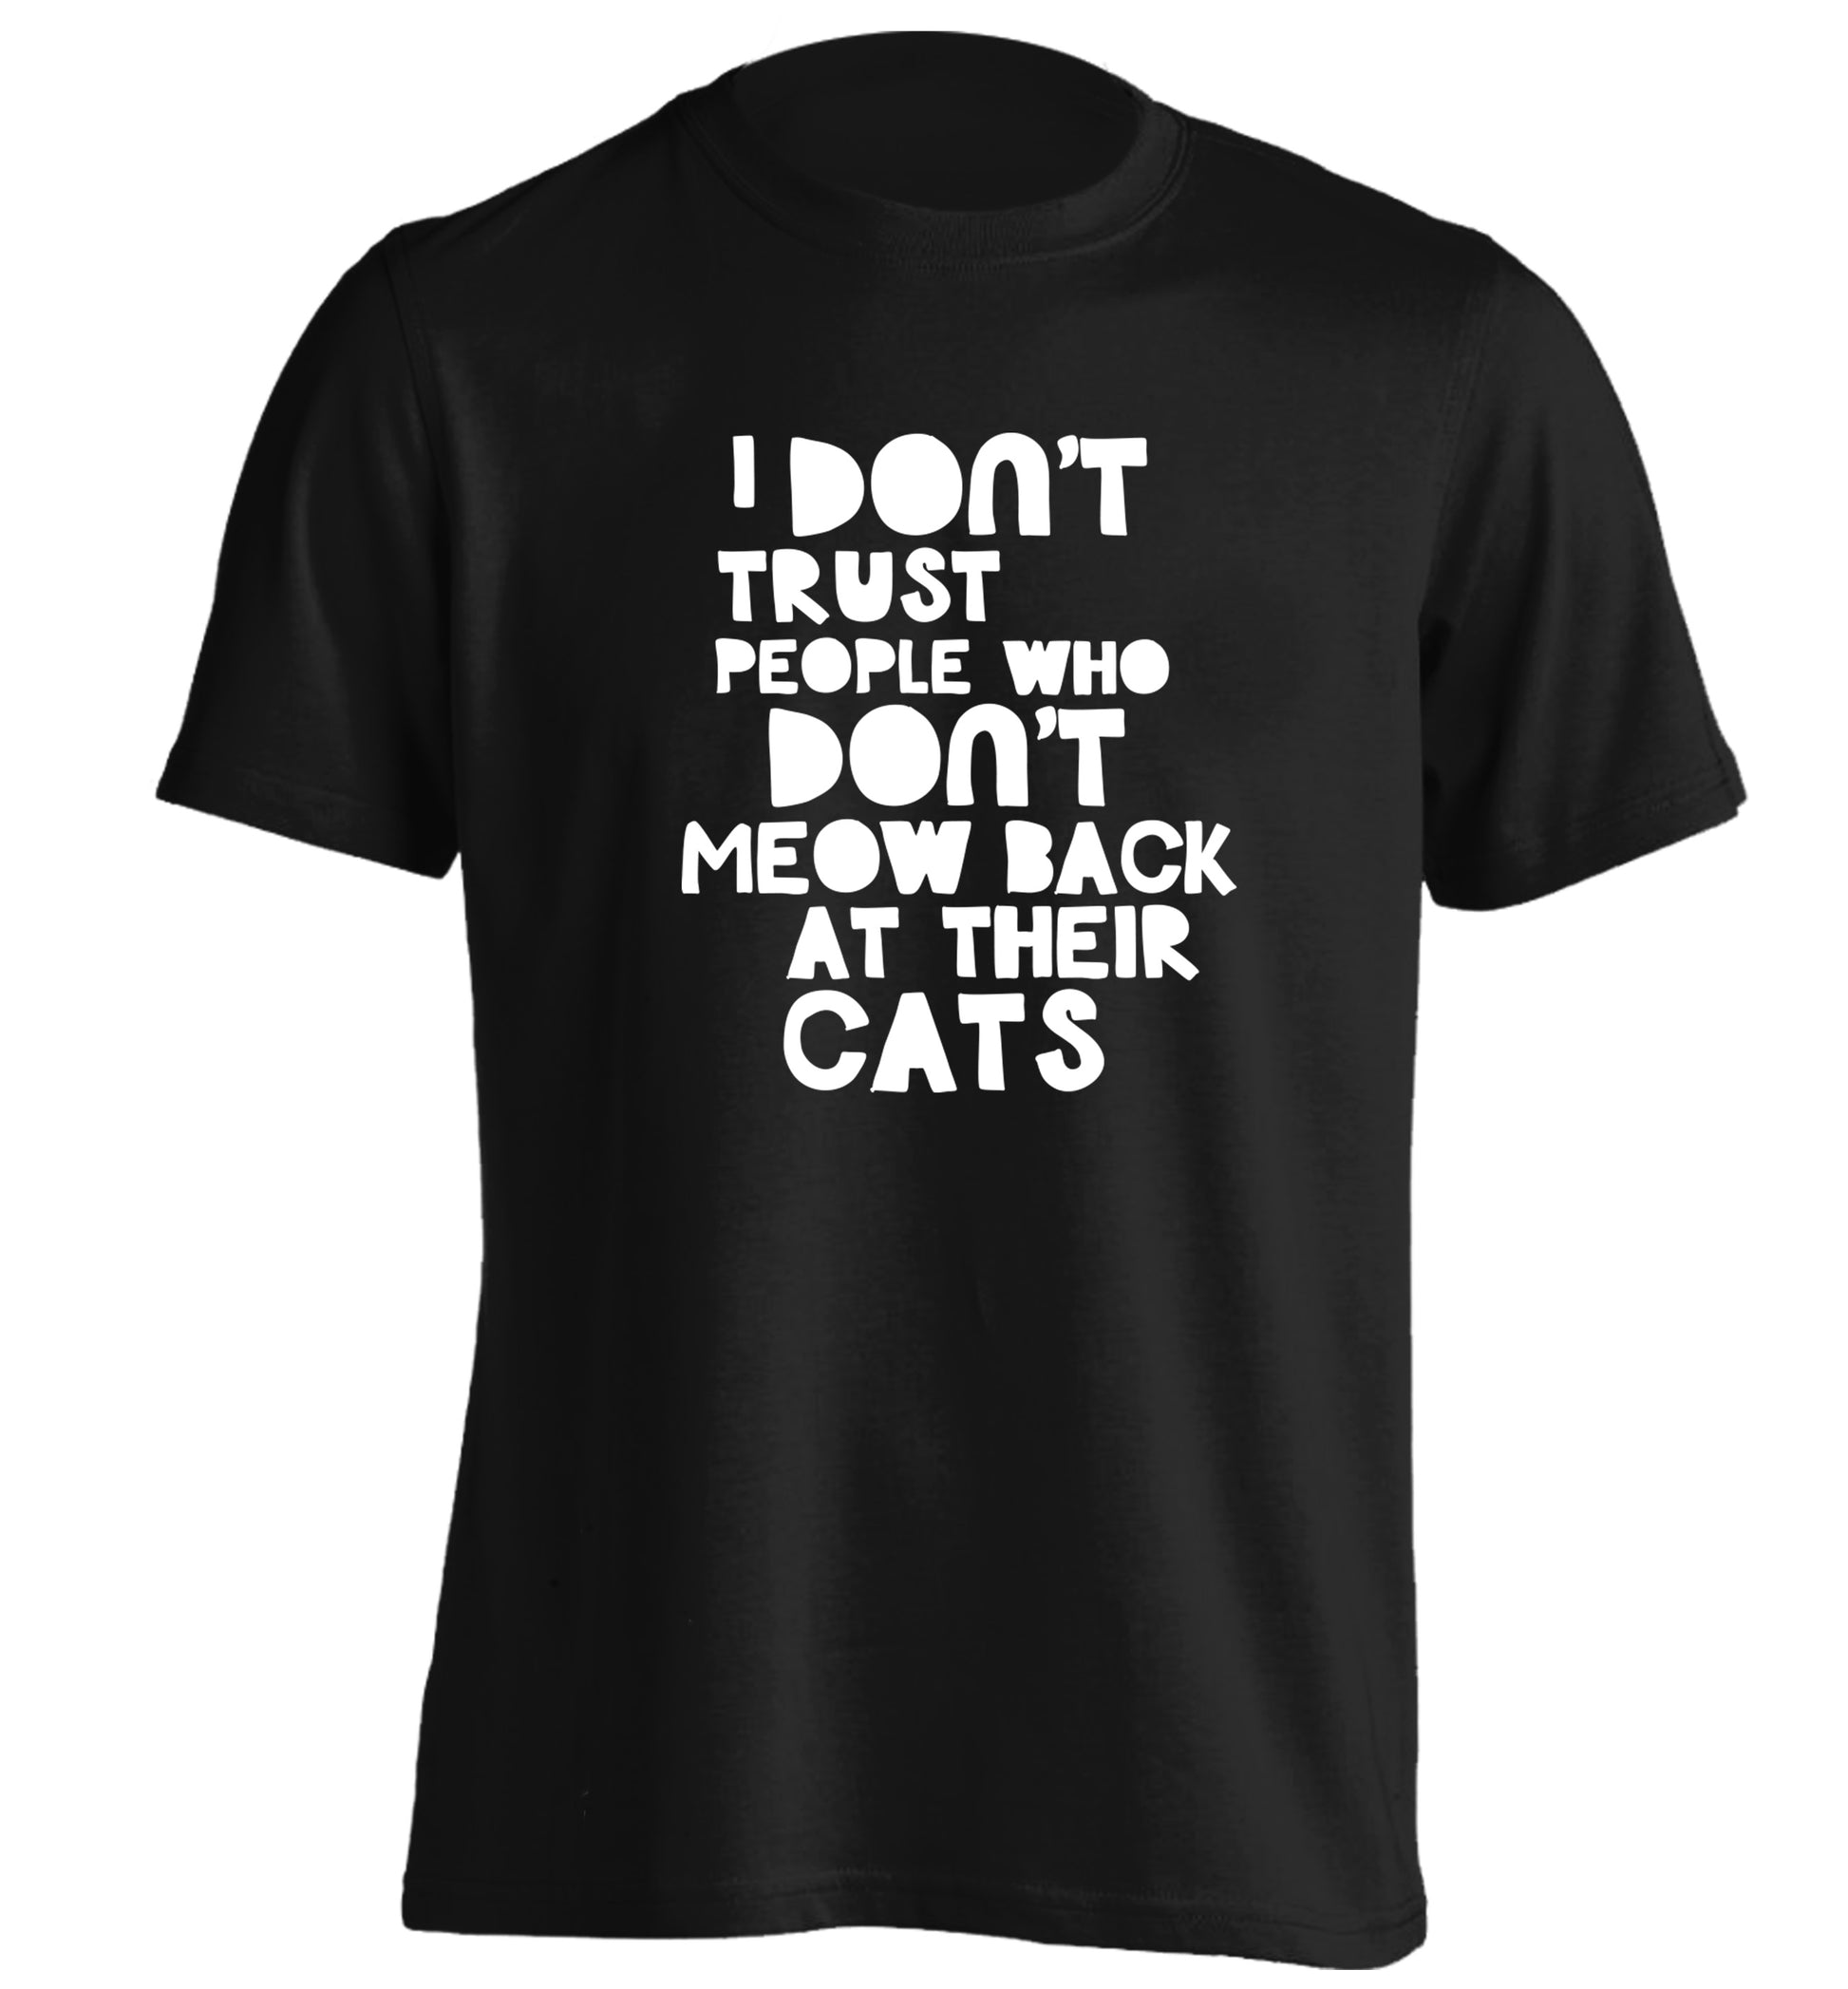 I don't trust people who don't meow back at their cats adults unisex black Tshirt 2XL